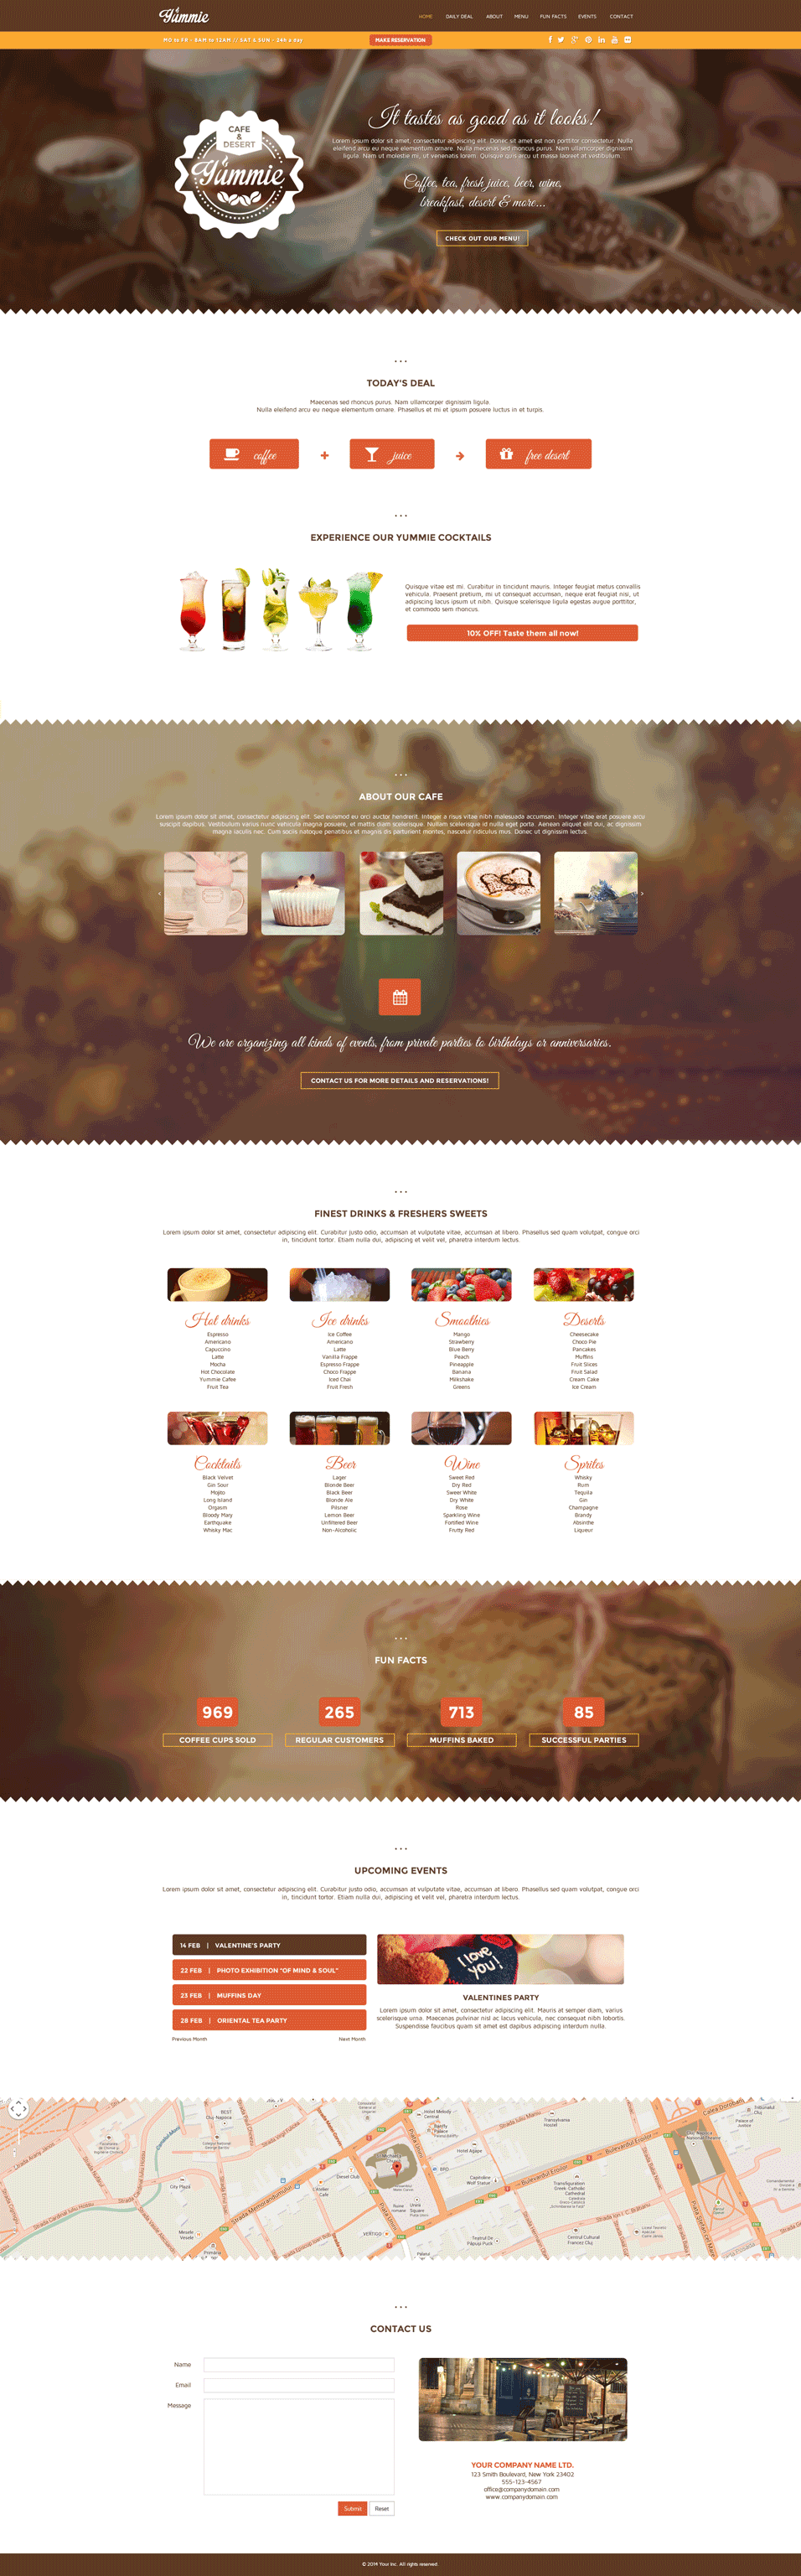 http://www.template.net/wp-content/uploads/2014/07/Yummie-One-Page-Animated-Parallax-HTML-Template.gif